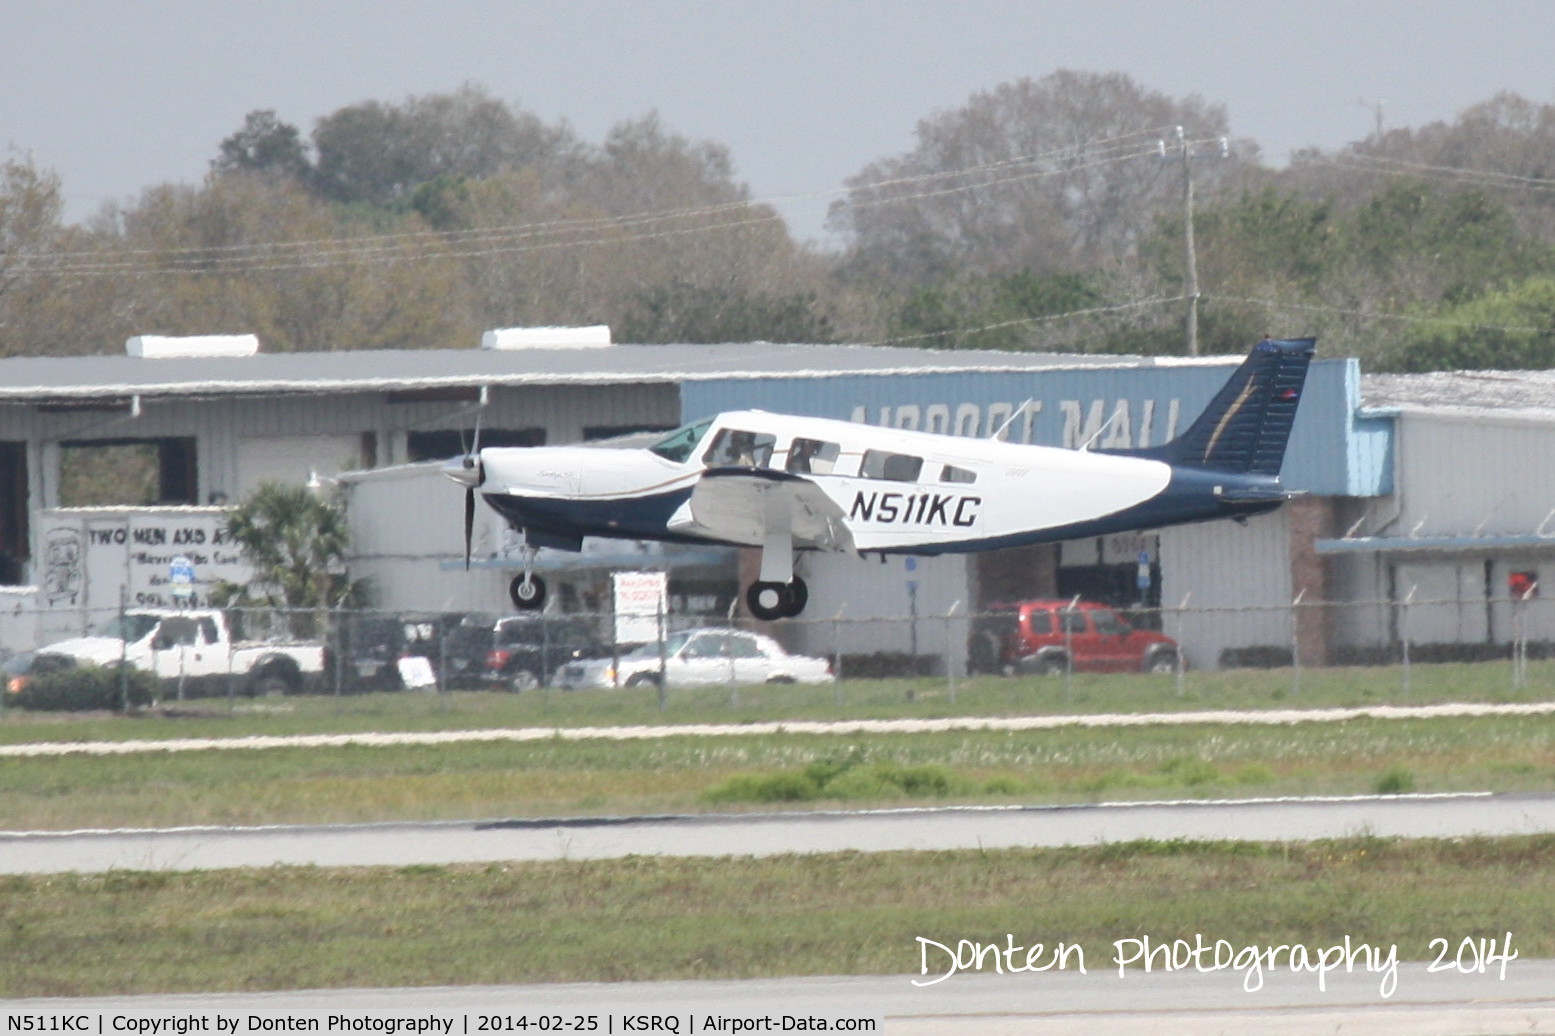 N511KC, 1980 Piper PA-32R-301 C/N 32R-8013055, Piper Saratoga (N511KC) arrives at Sarasota-Bradenton International Airport following a flight from Fort Lauderdale Executive Airport